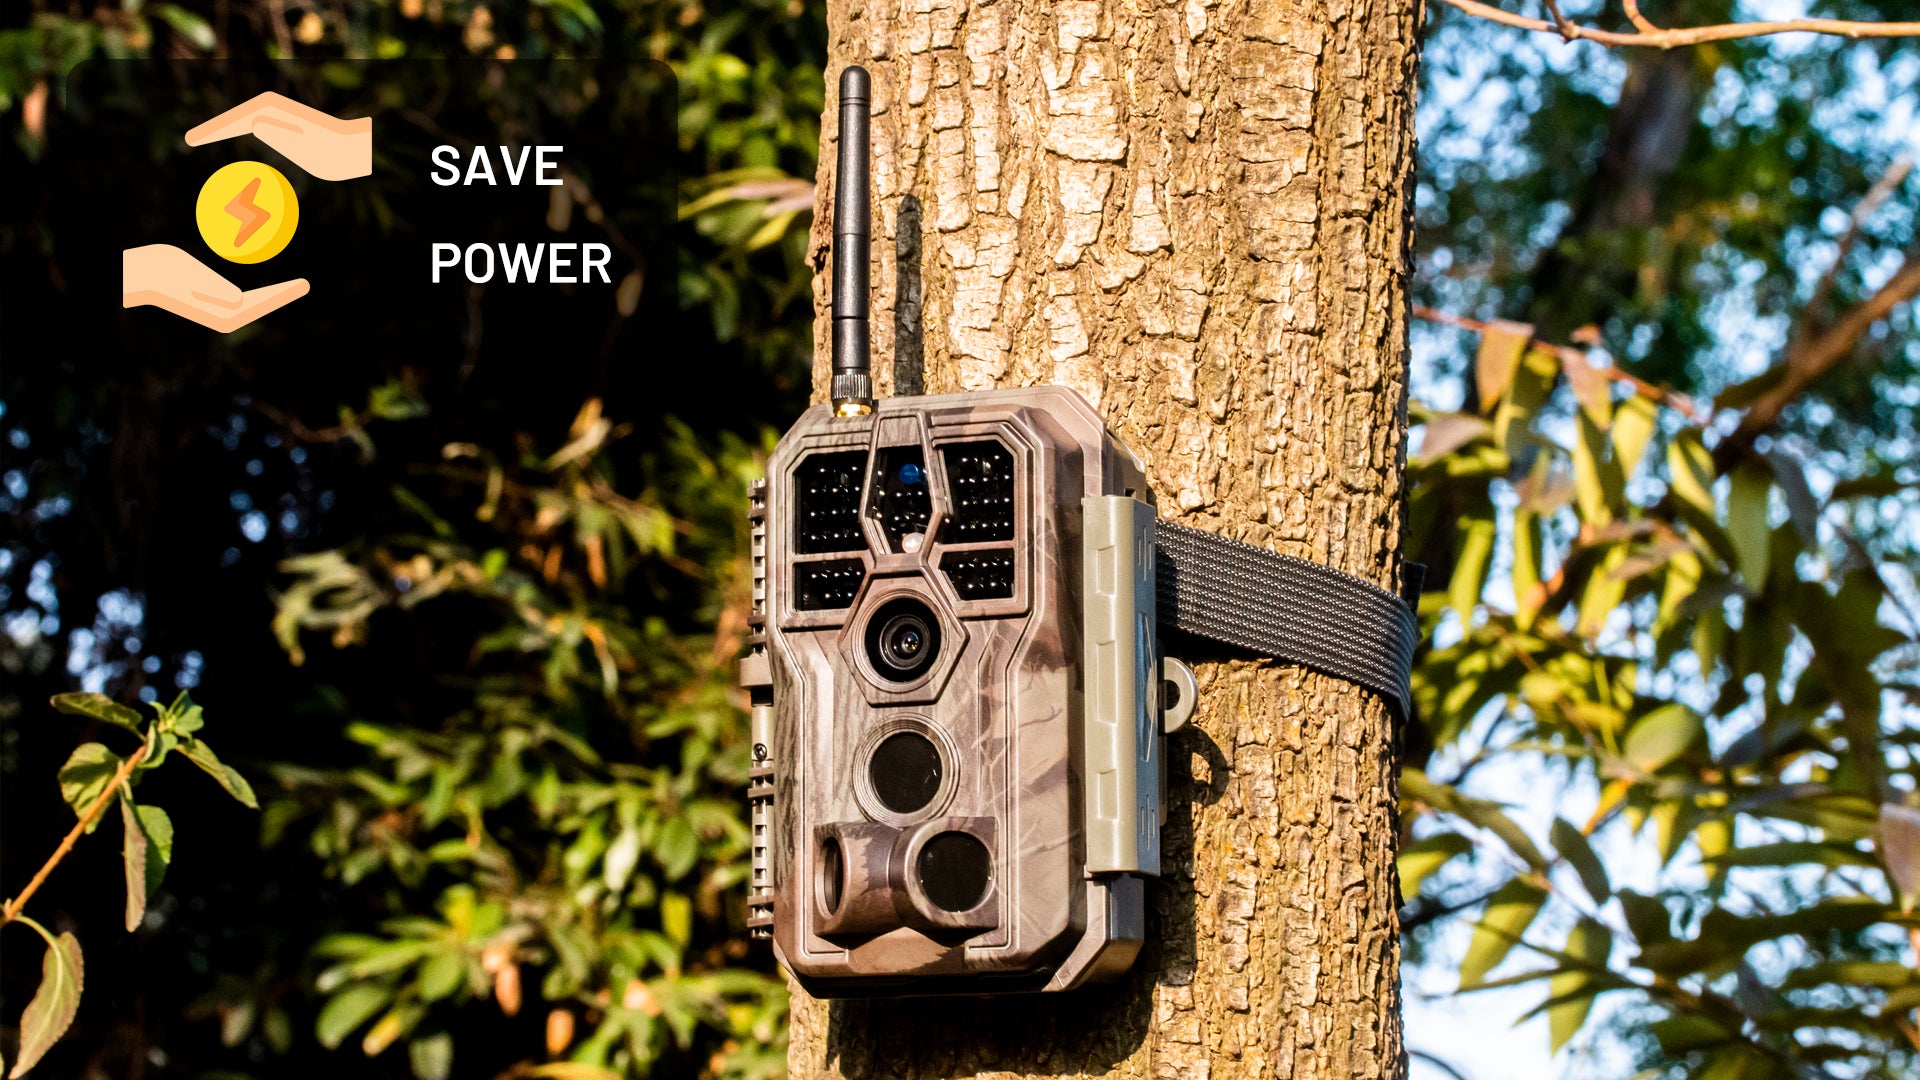 How to make the GardePro trail camera more power efficient